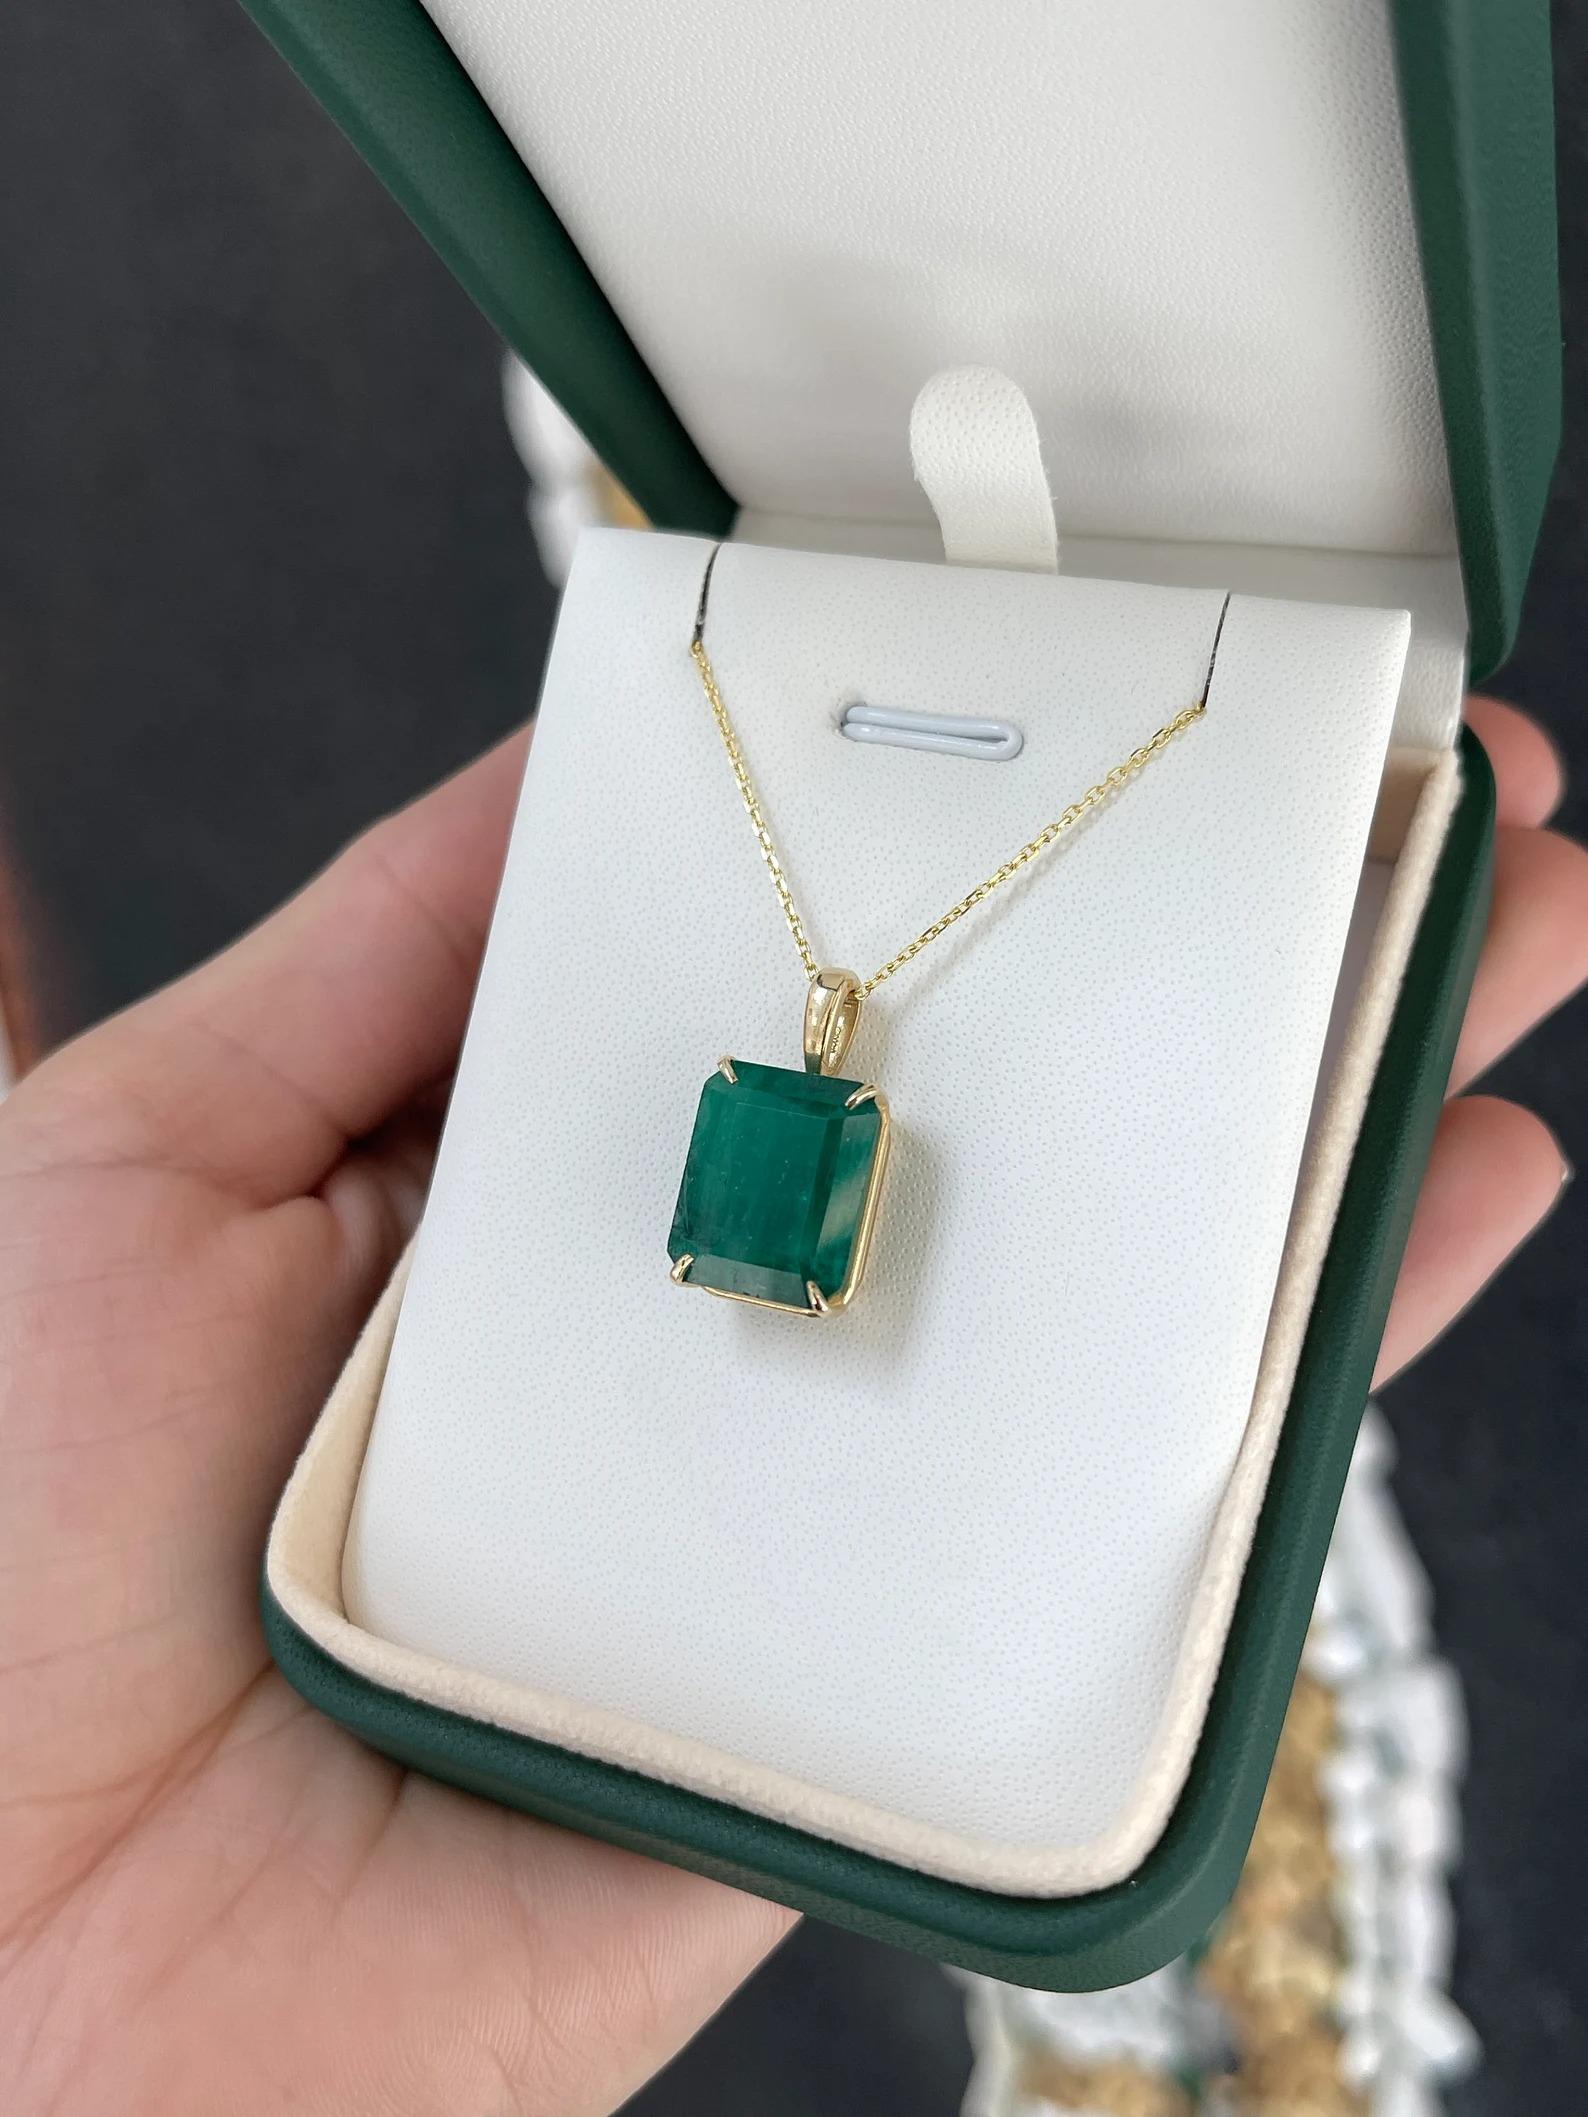 9.80 Carats Huge Dark Green Emerald Cut Solitaire Unisex Pendant Gold 14K In New Condition For Sale In Jupiter, FL